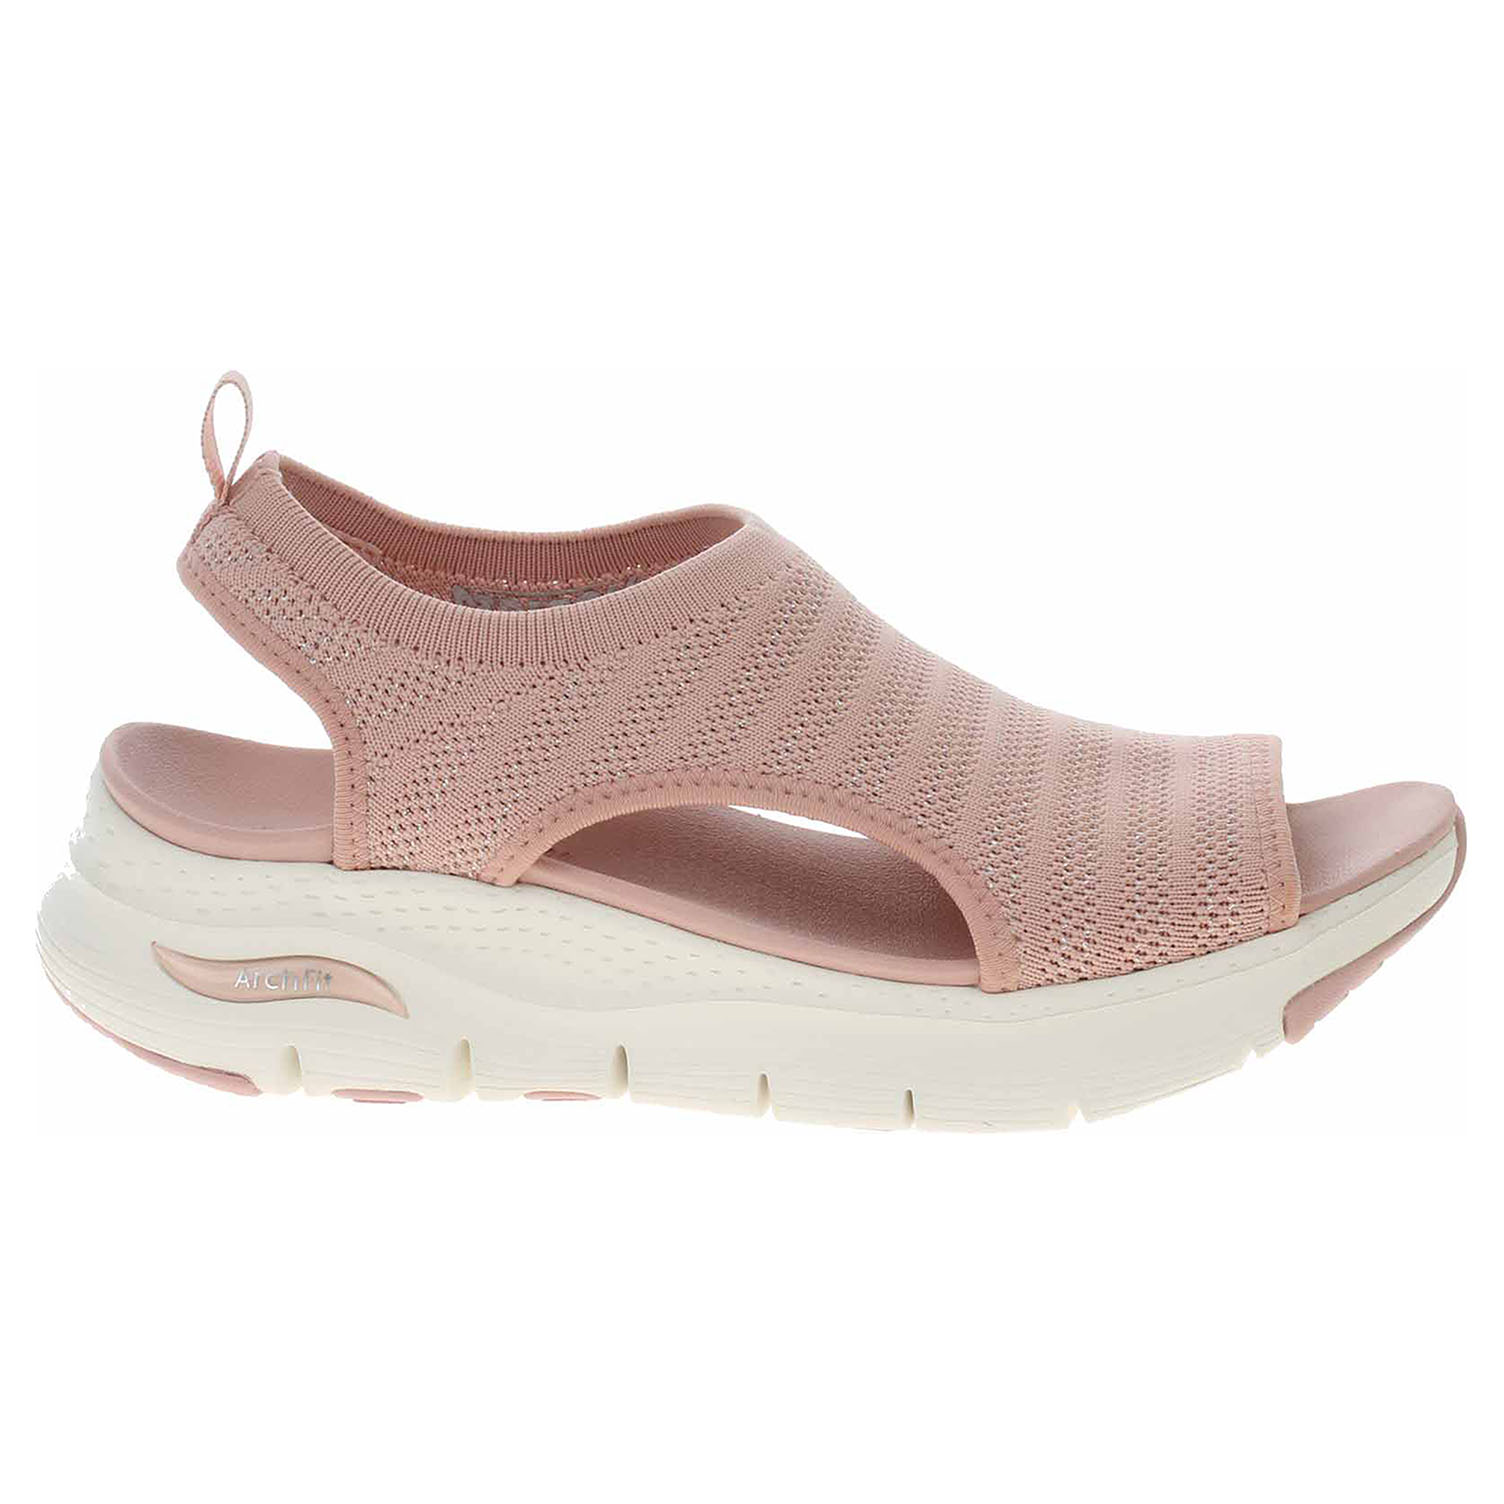 Skechers Arch Fit-Darling Days blush